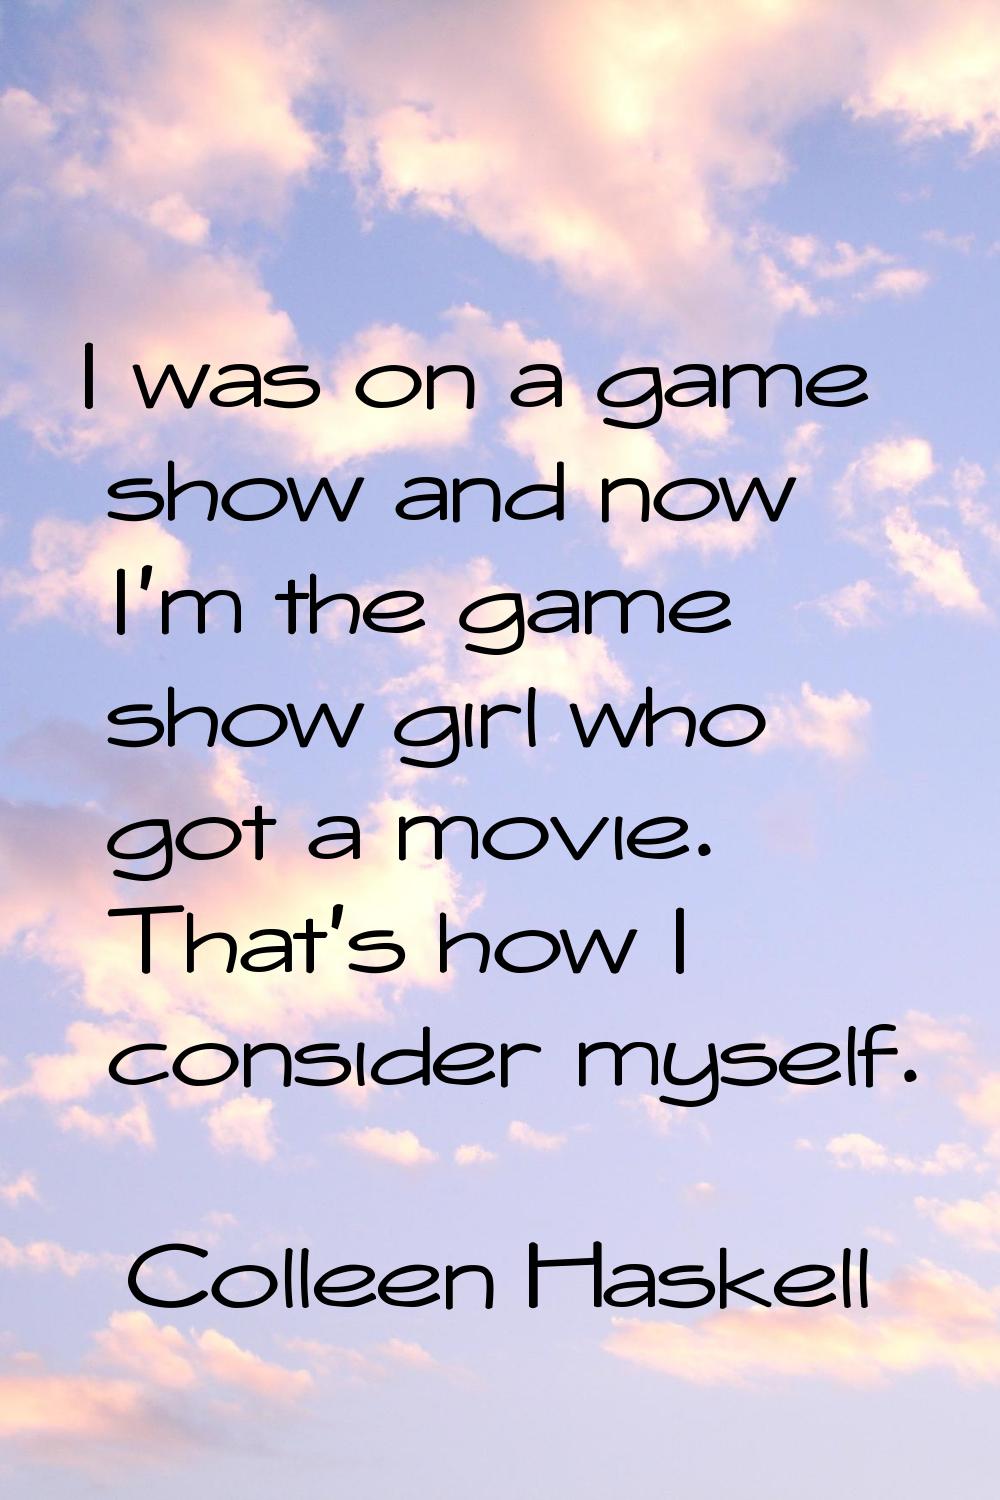 I was on a game show and now I'm the game show girl who got a movie. That's how I consider myself.